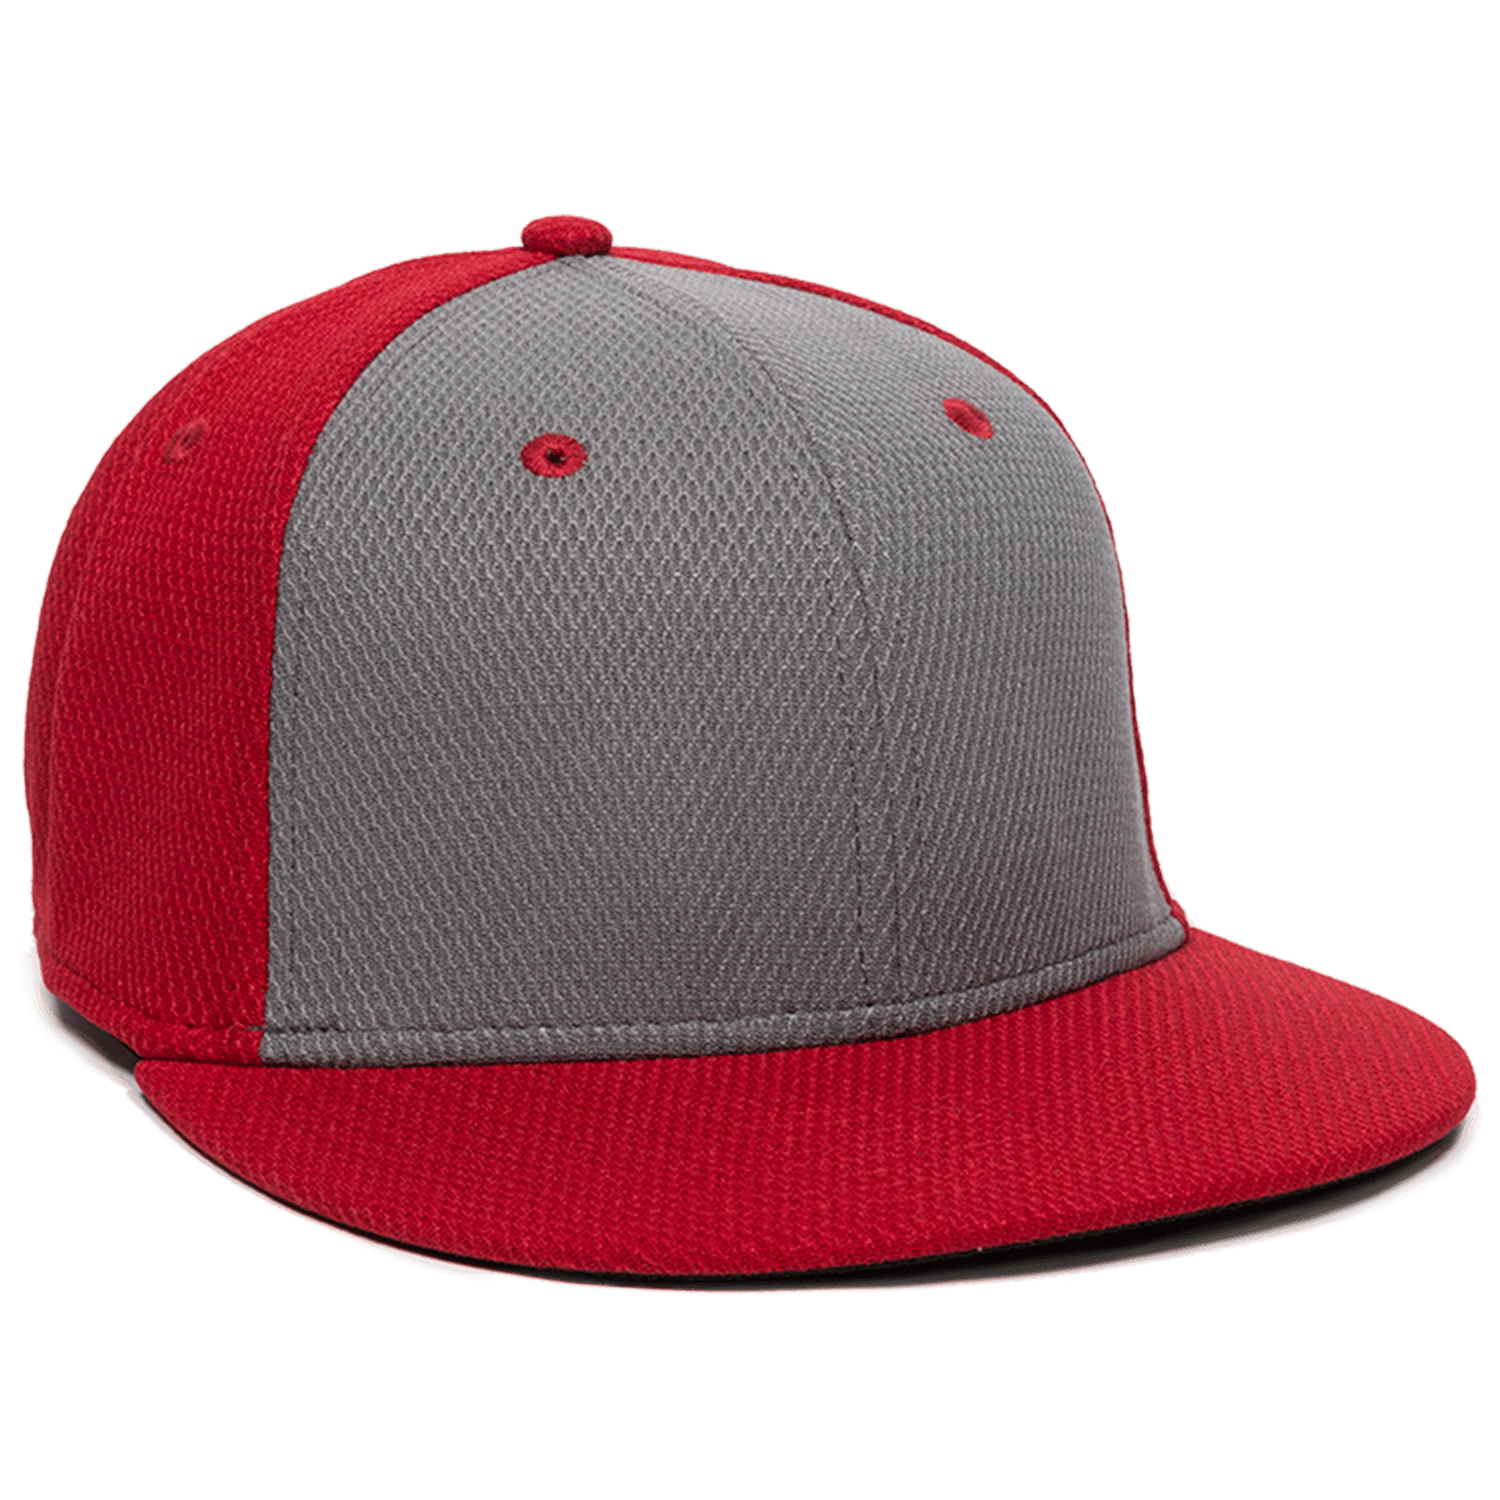 Pins and Aces | Fitted Performance Hat - Maroon 2XL